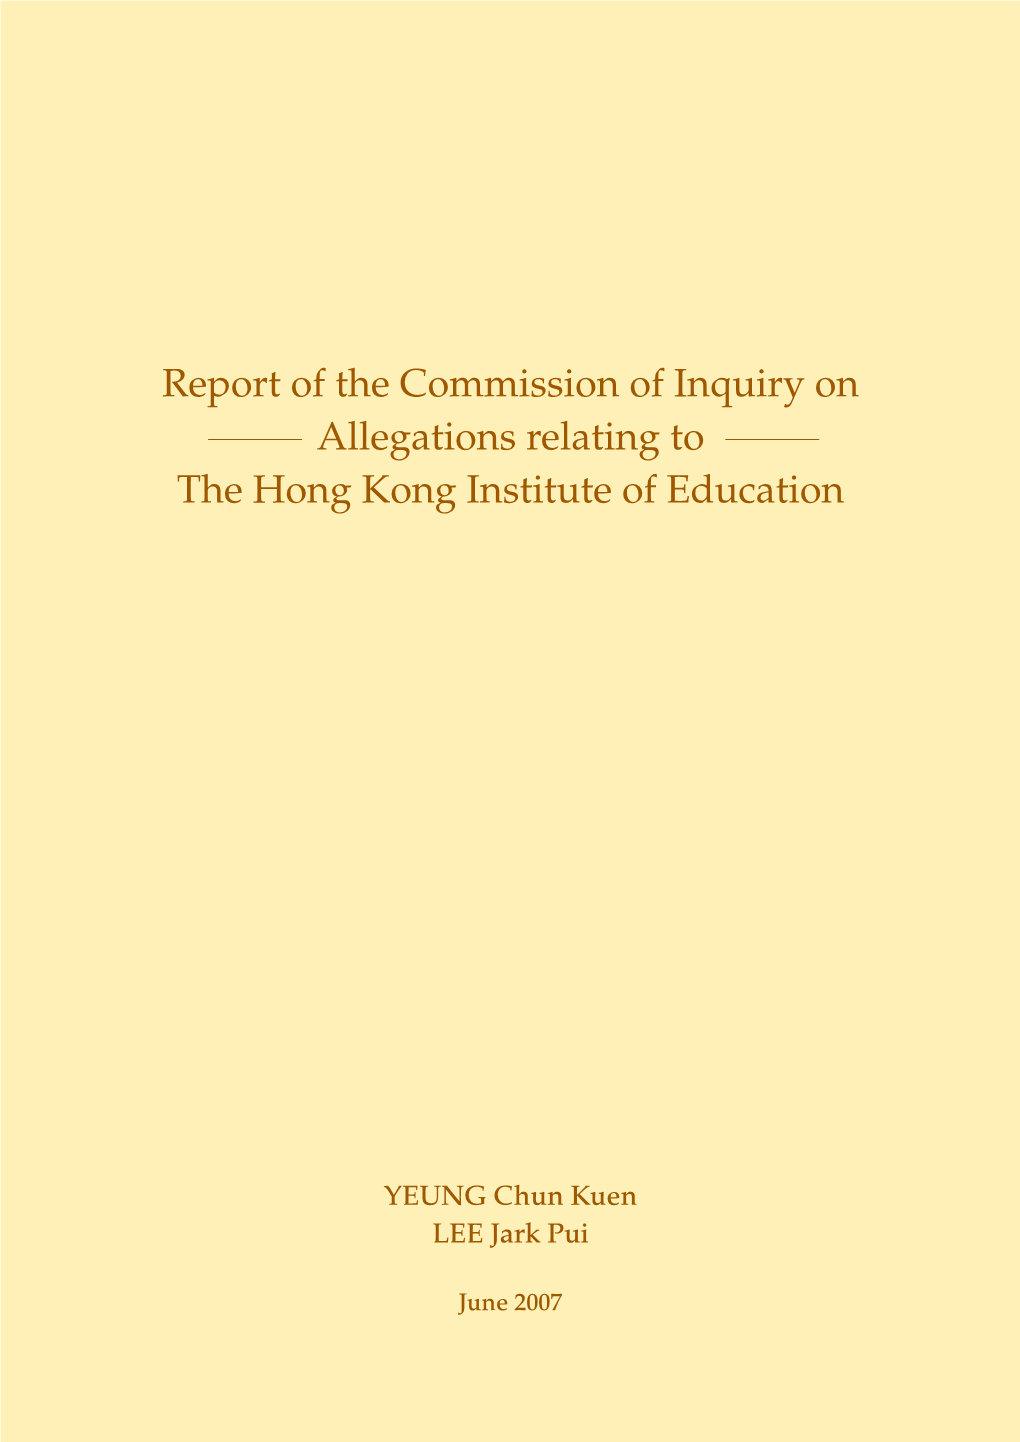 Report of the Commission of Inquiry on Allegations Relating to the Hong Kong Institute of Education